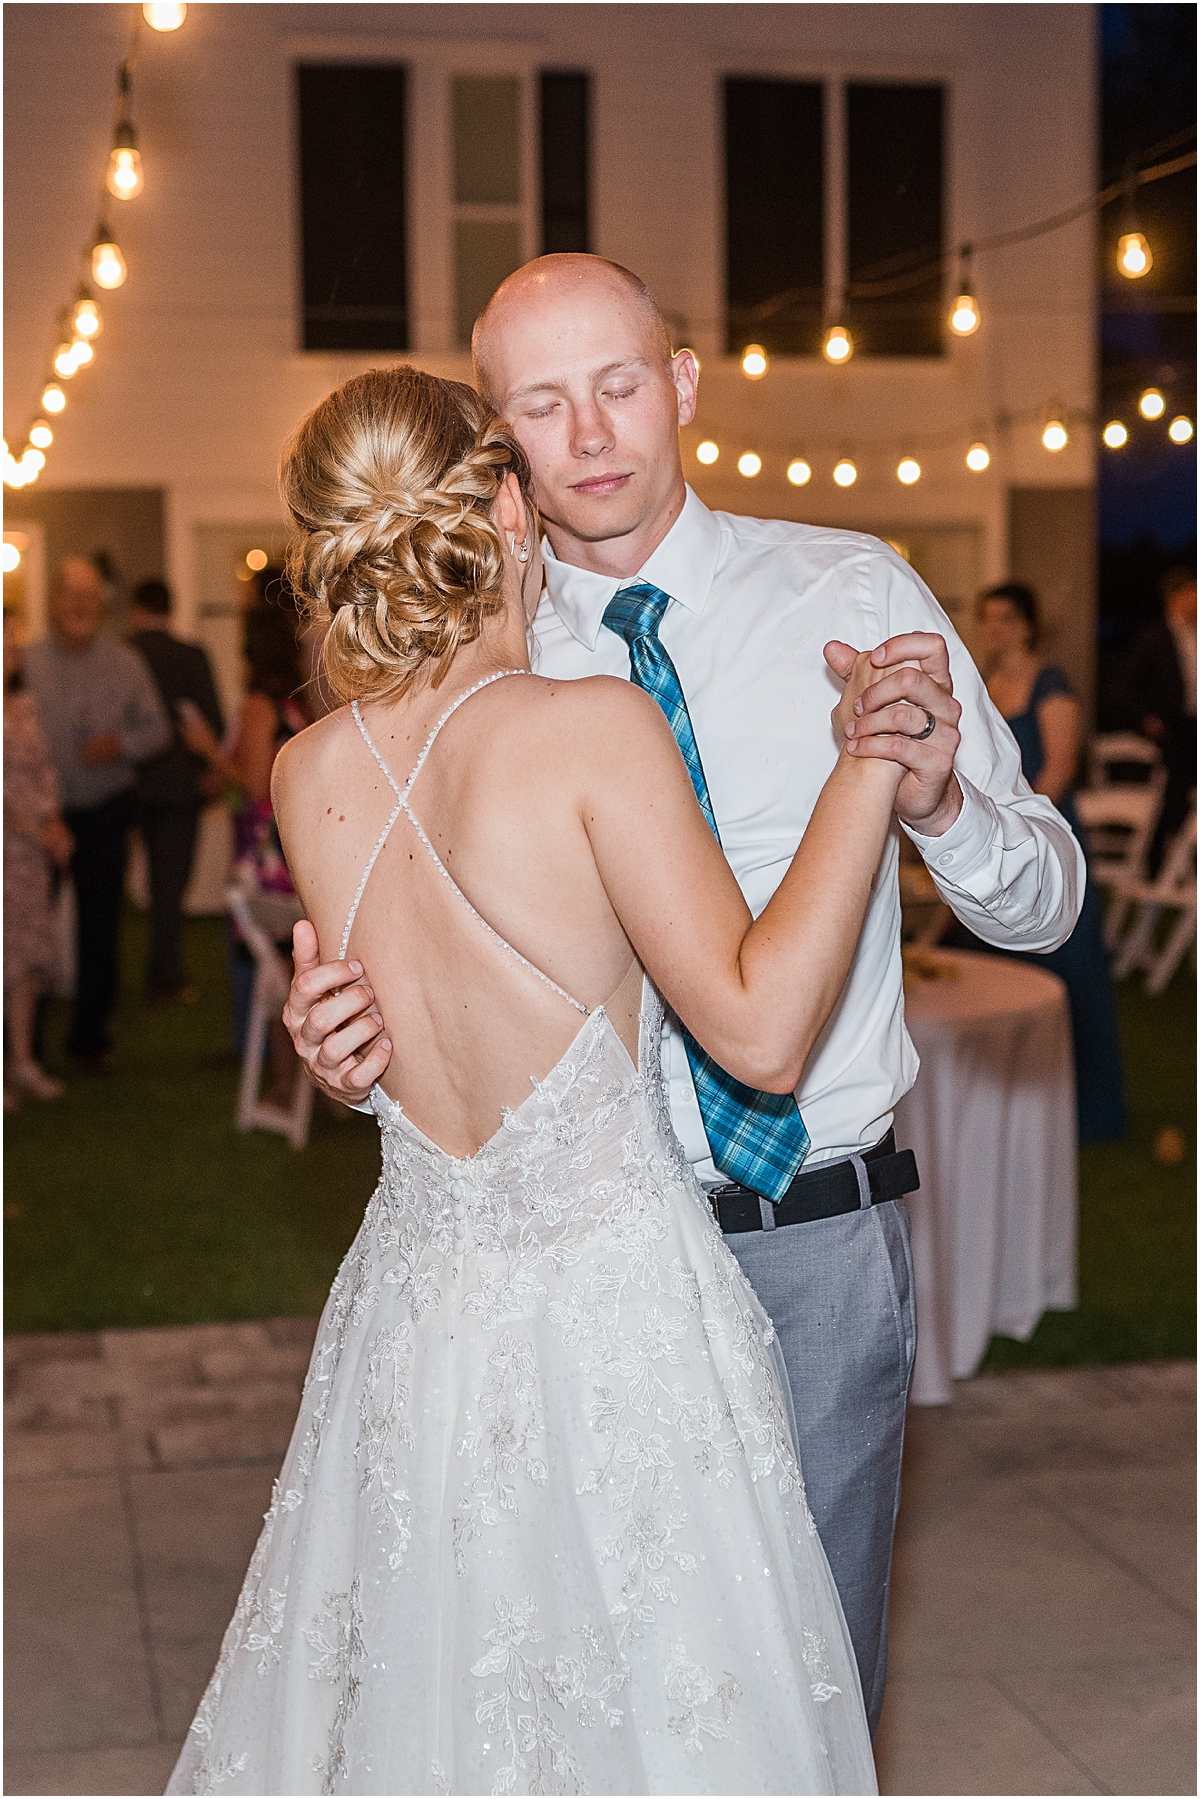 Luke and Brynn dancing closely taken by a wedding photographer